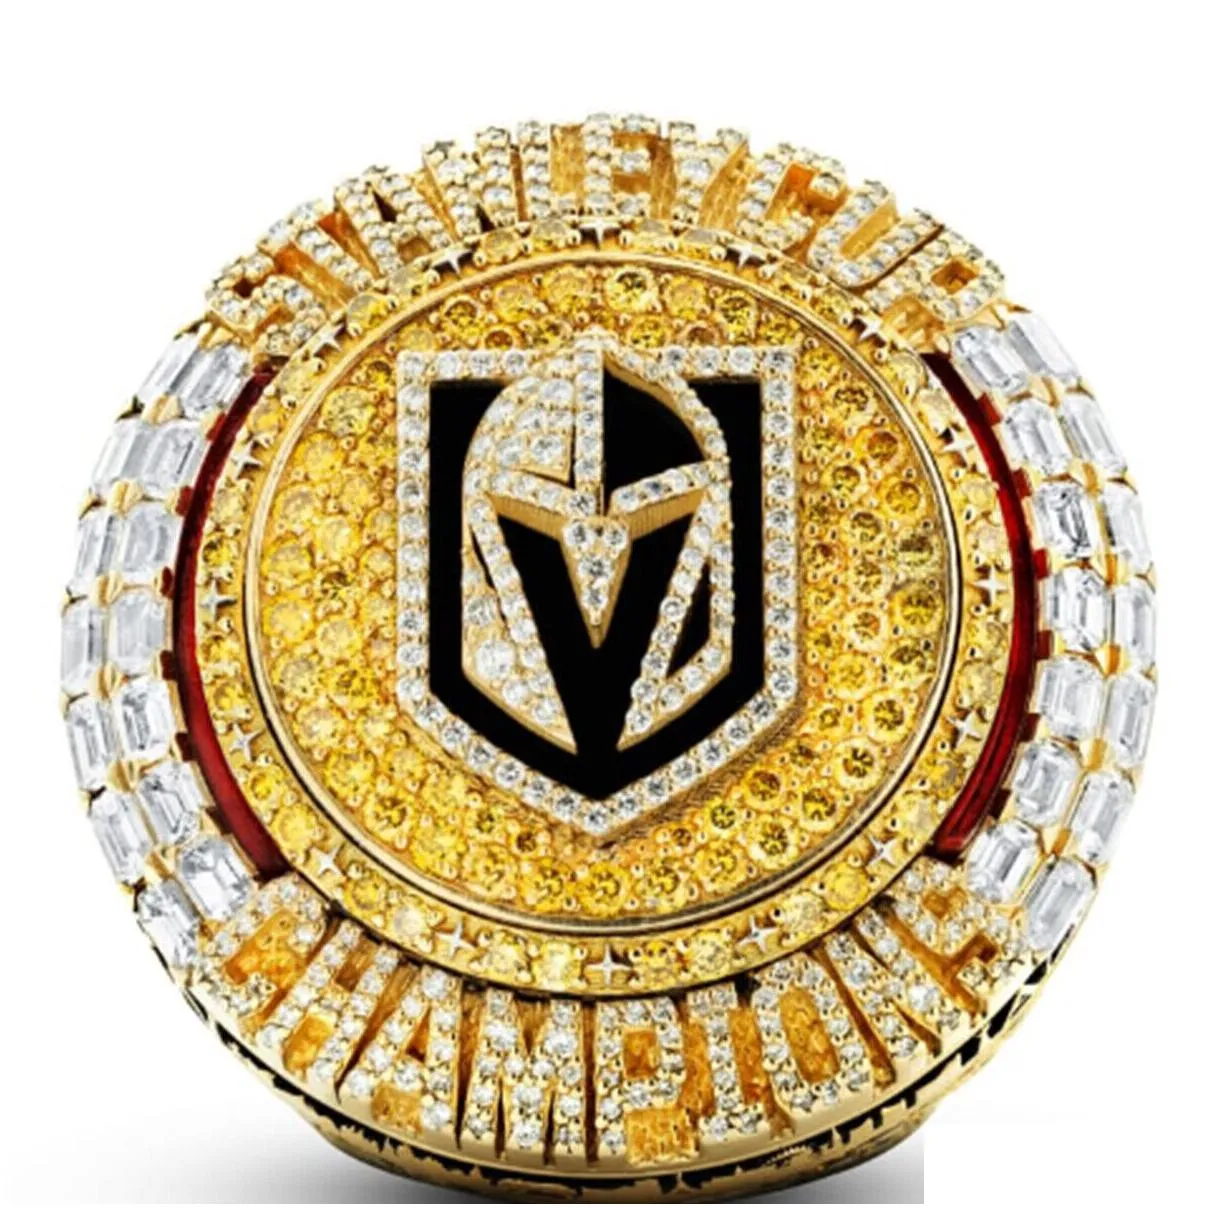 2022 2023 golden knights  cup team champions championship ring with wooden display box souvenir men fan gift drop shipping